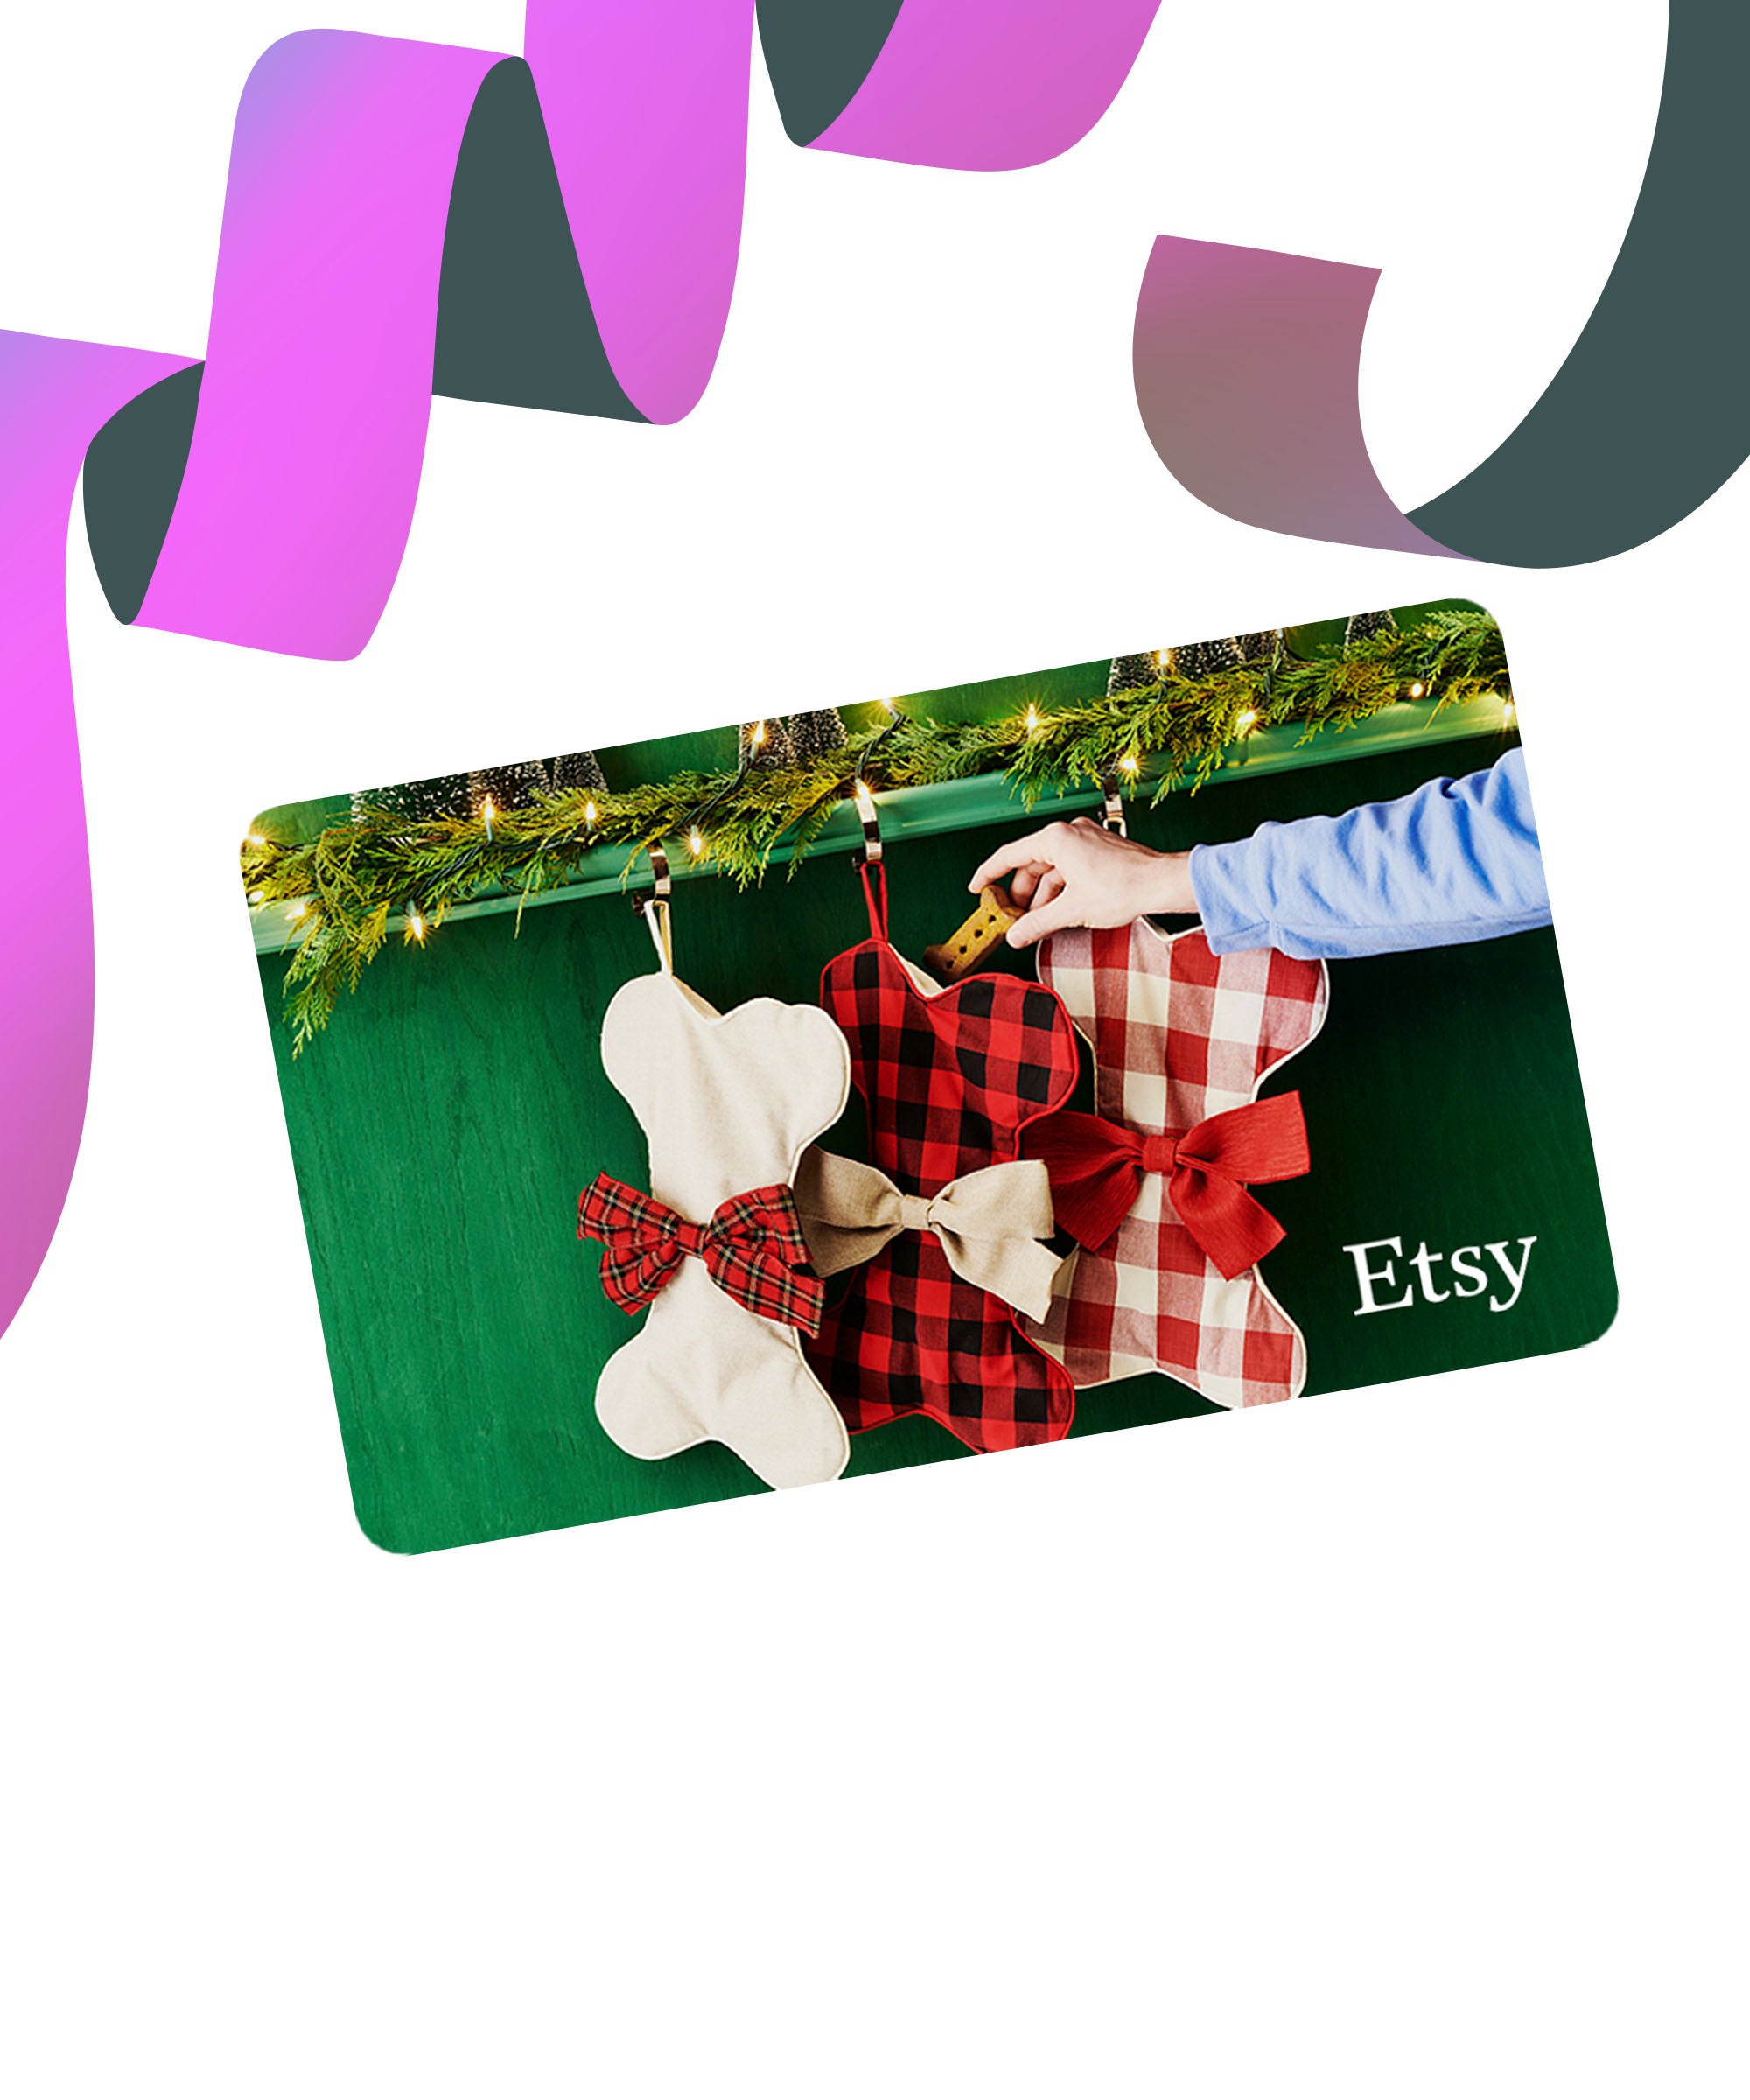 10 Best Holiday Gift Cards You Can Give Without Guilt in 2014 - TheStreet